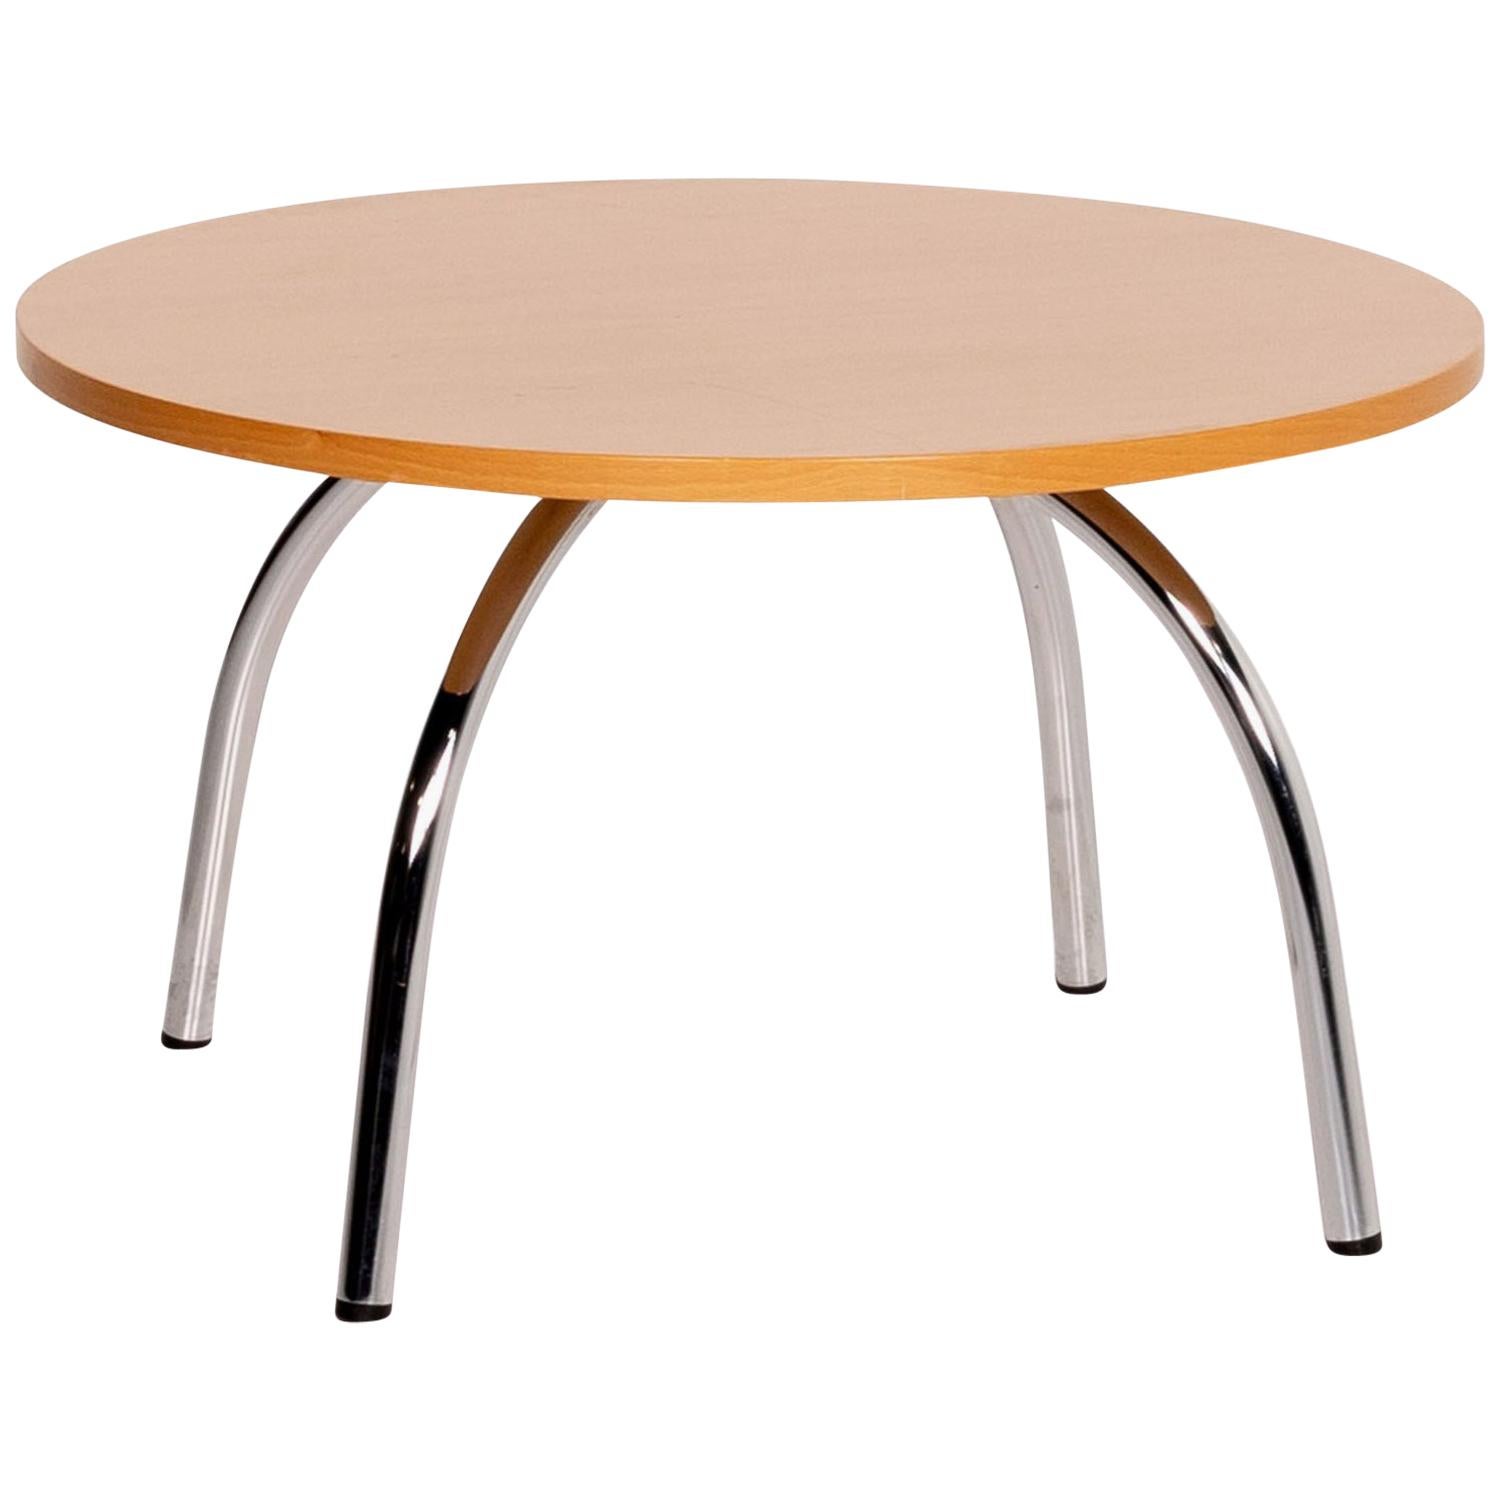 Walter Knoll Wooden Coffee Table Round Table For Sale